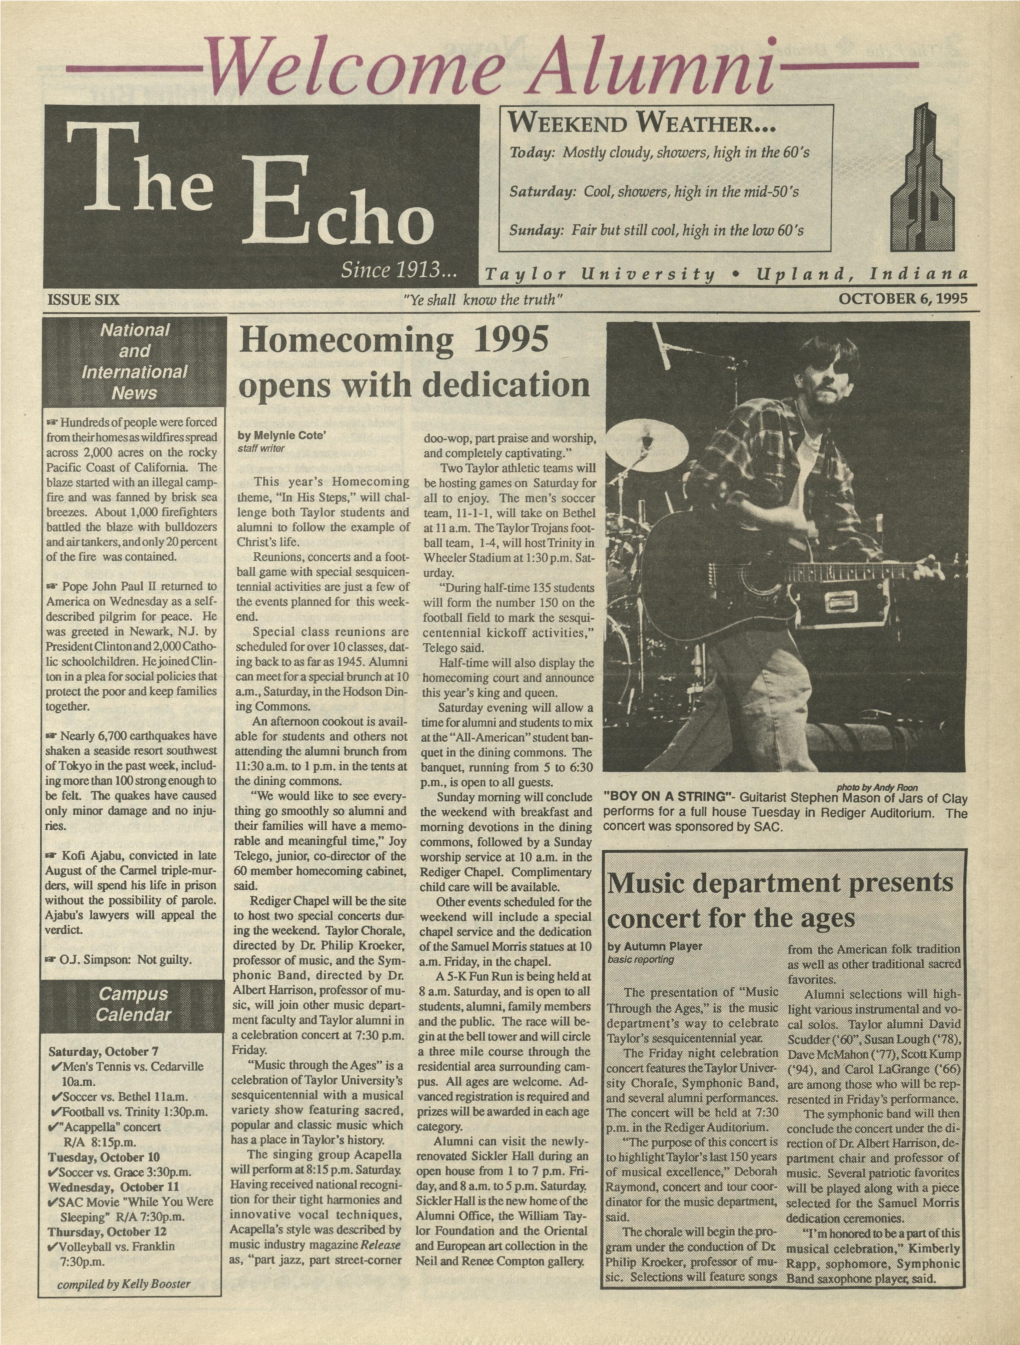 Homecoming 1995 Opens with Dedication